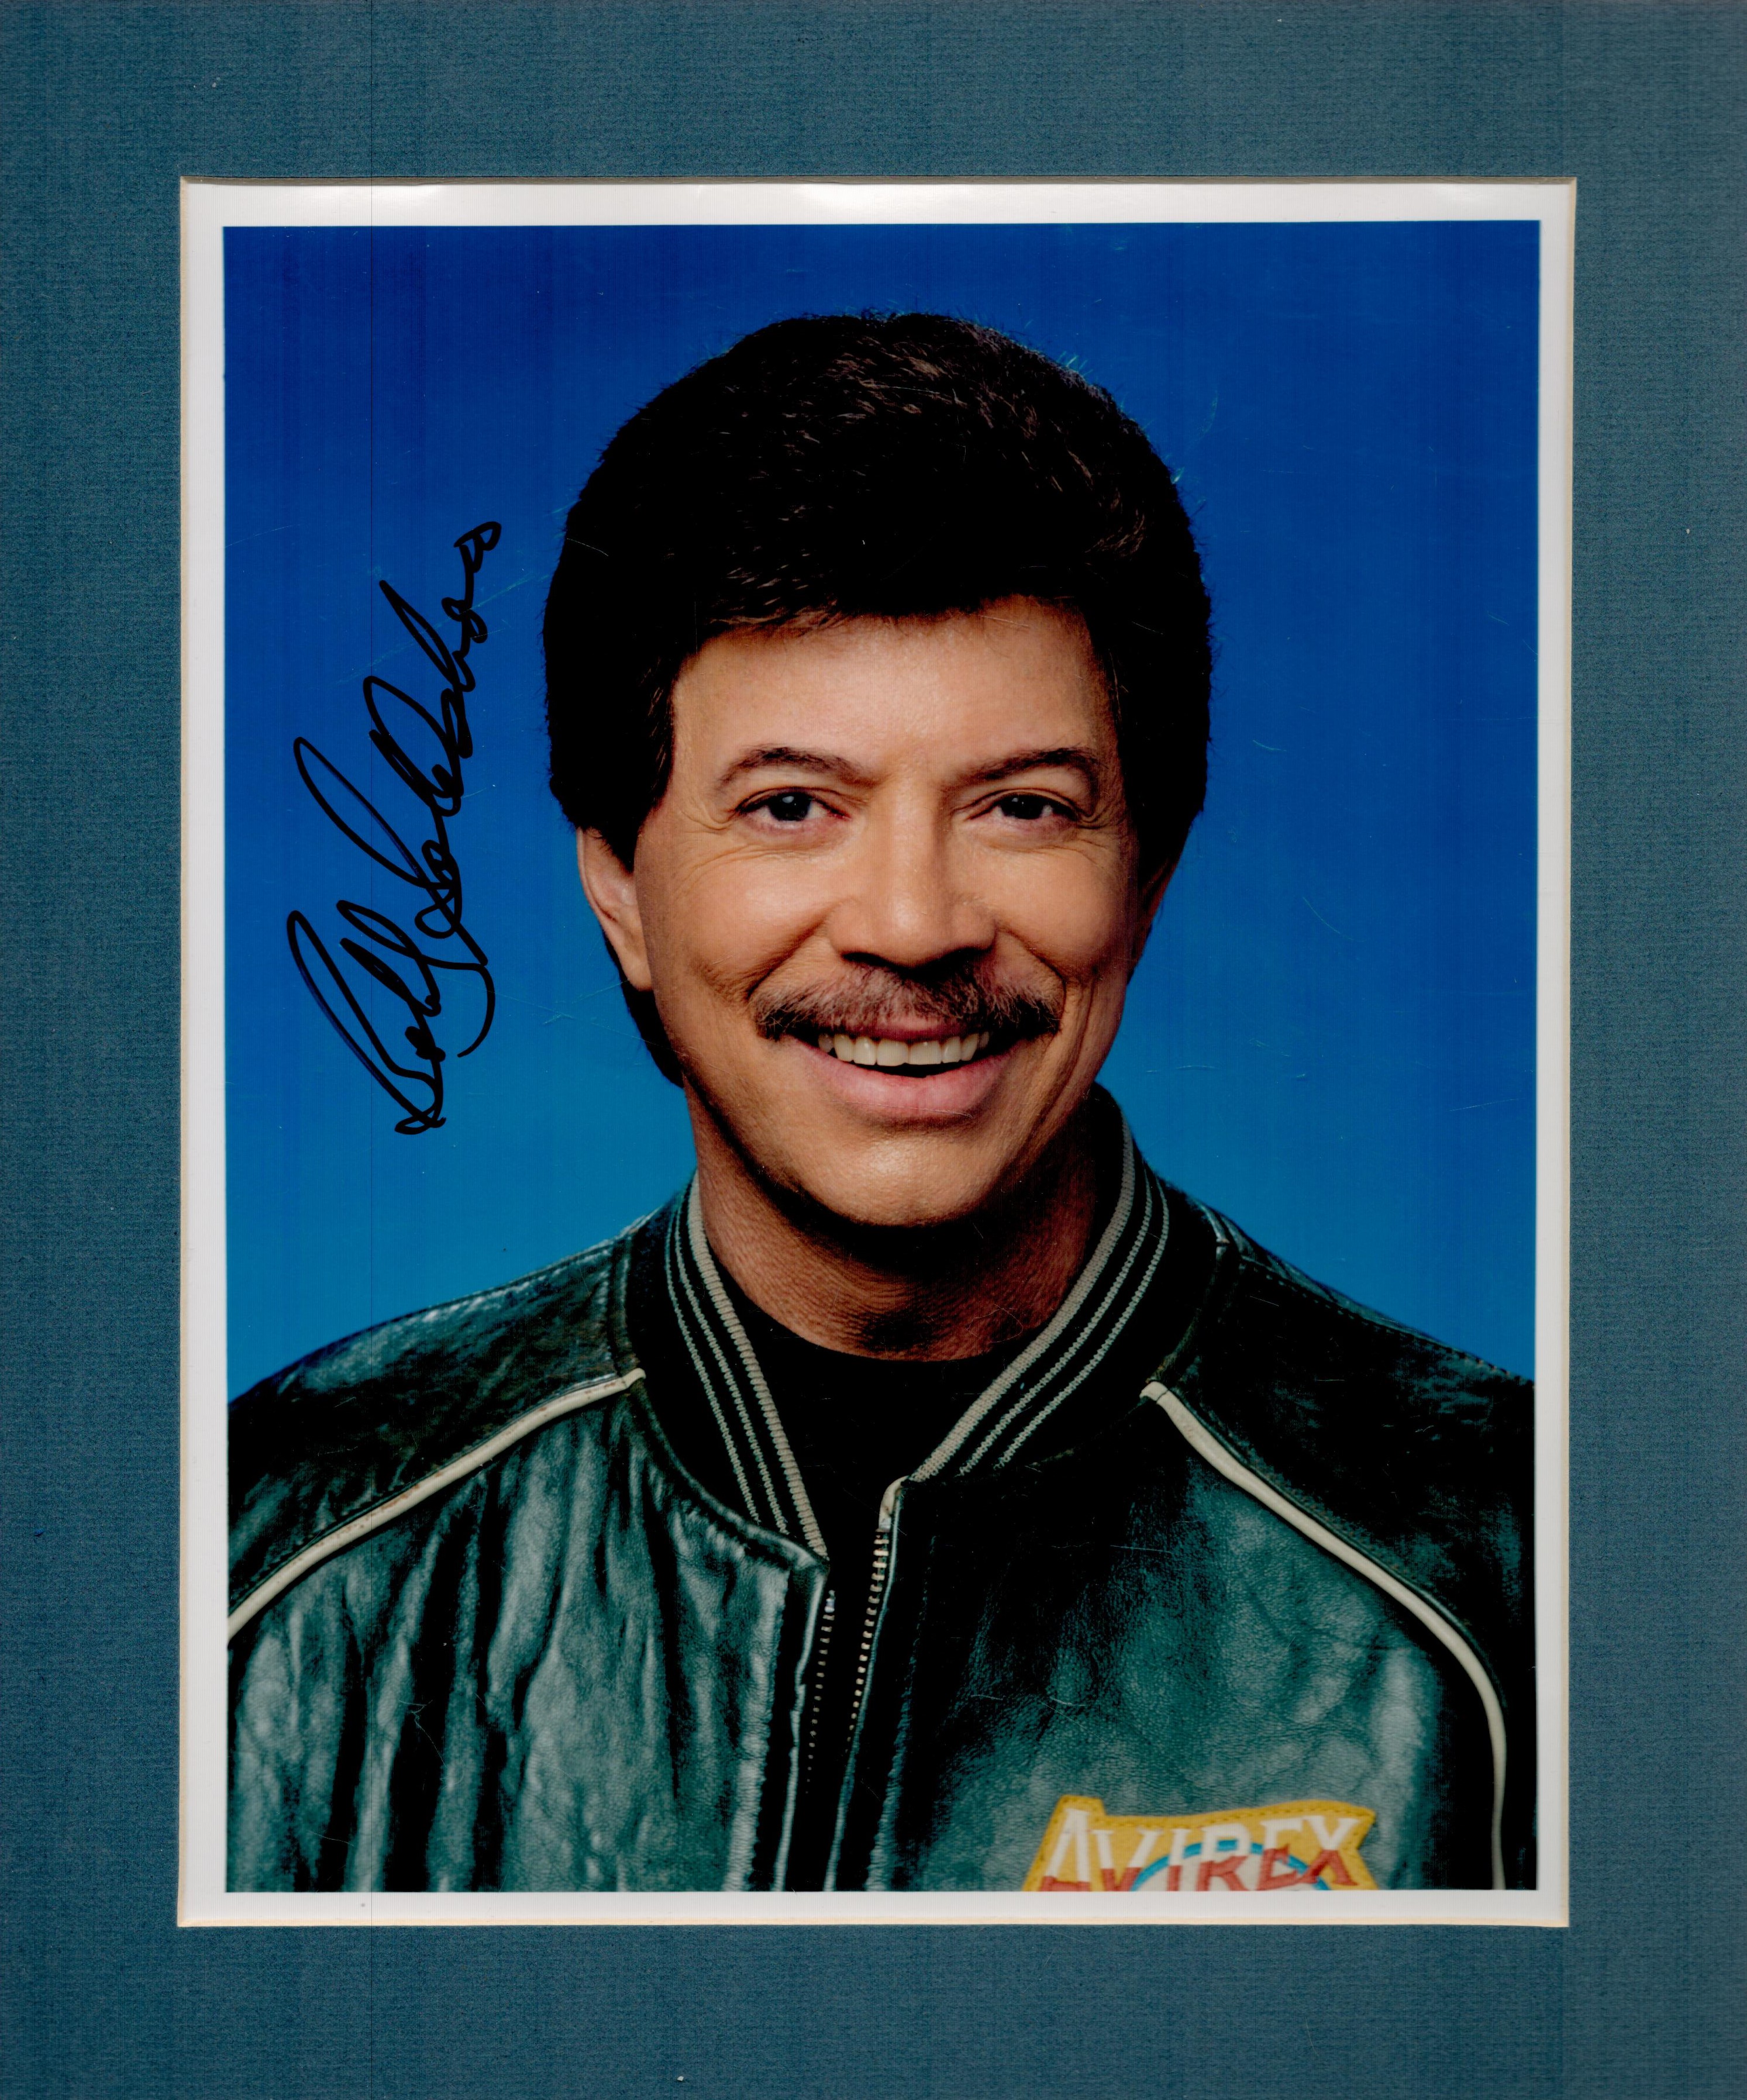 Bobby Goldsboro signed 12x10 overall mounted colour photo. Good Condition. All autographs come